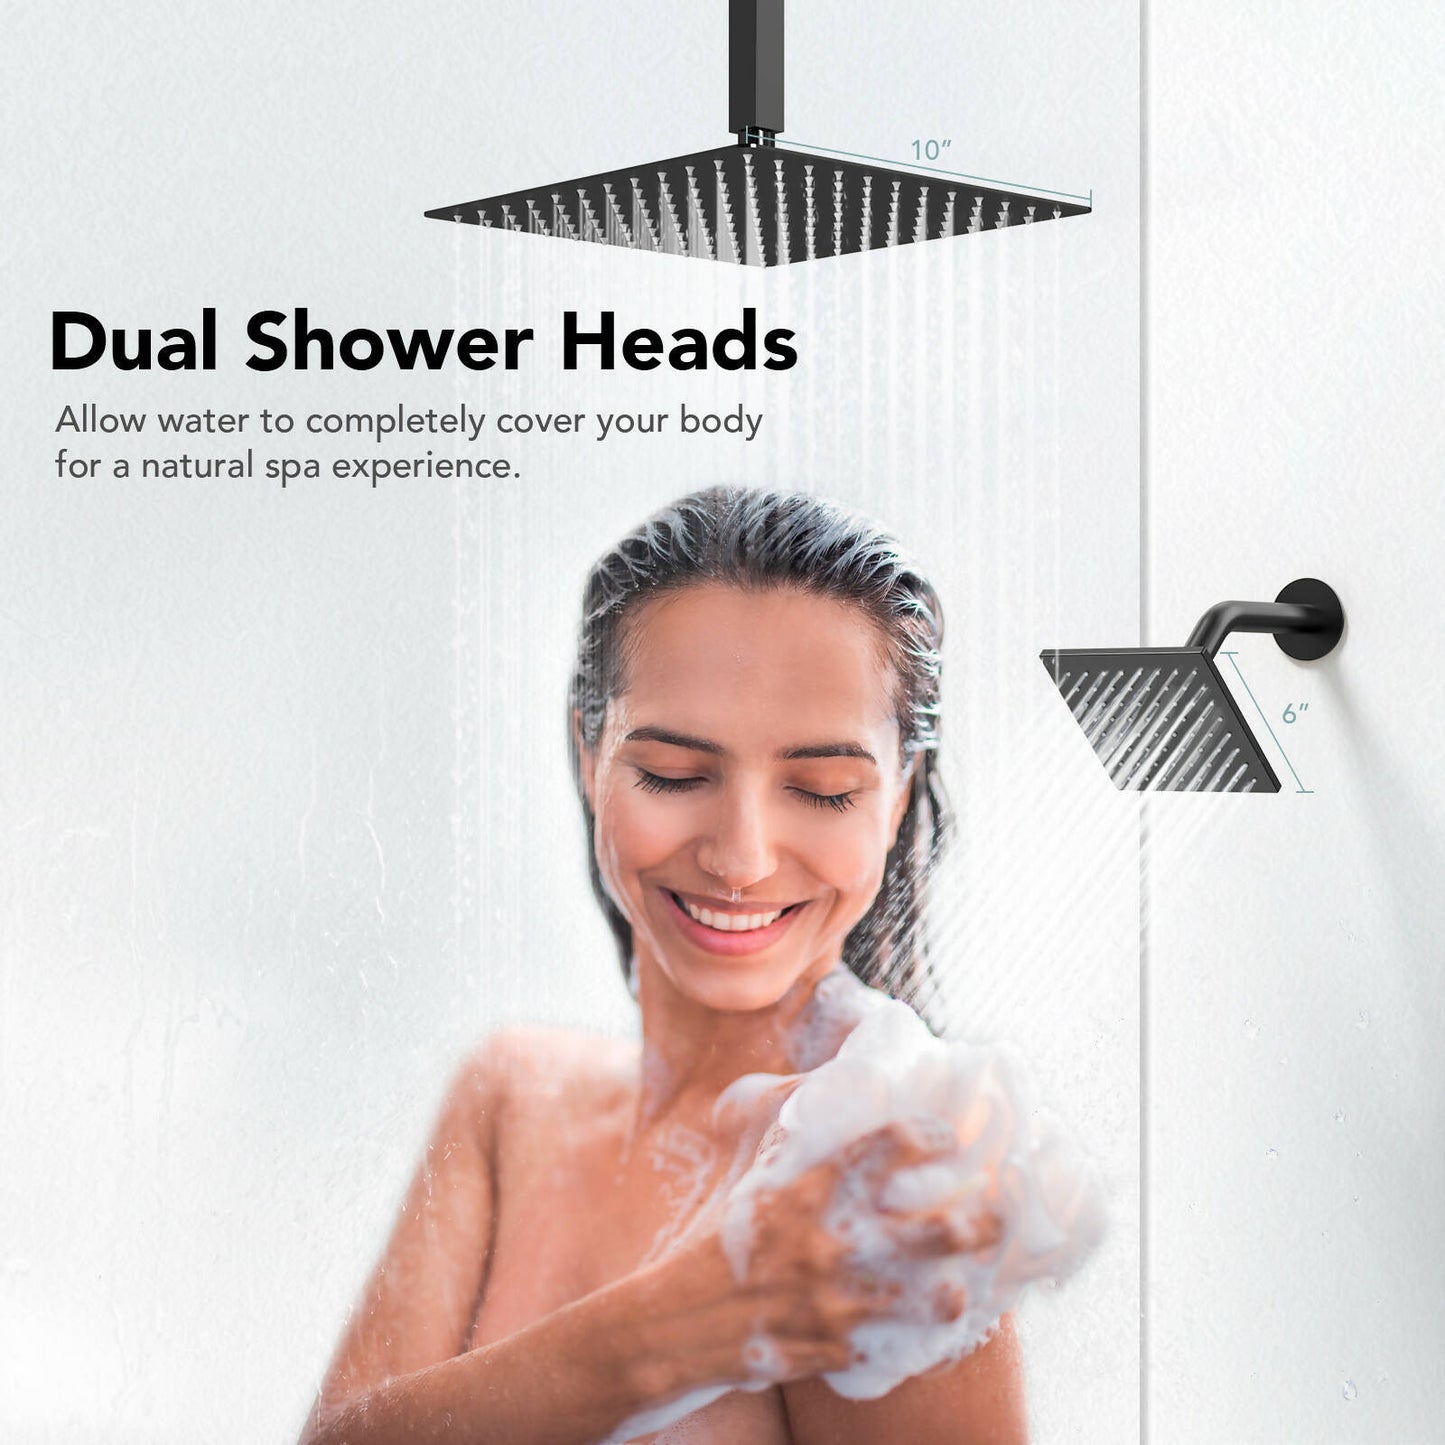 DualJetSpa 10" High-Pressure Rainfall Shower Faucet, Celling Mount, Rough in-Valve, 2.5 GPM